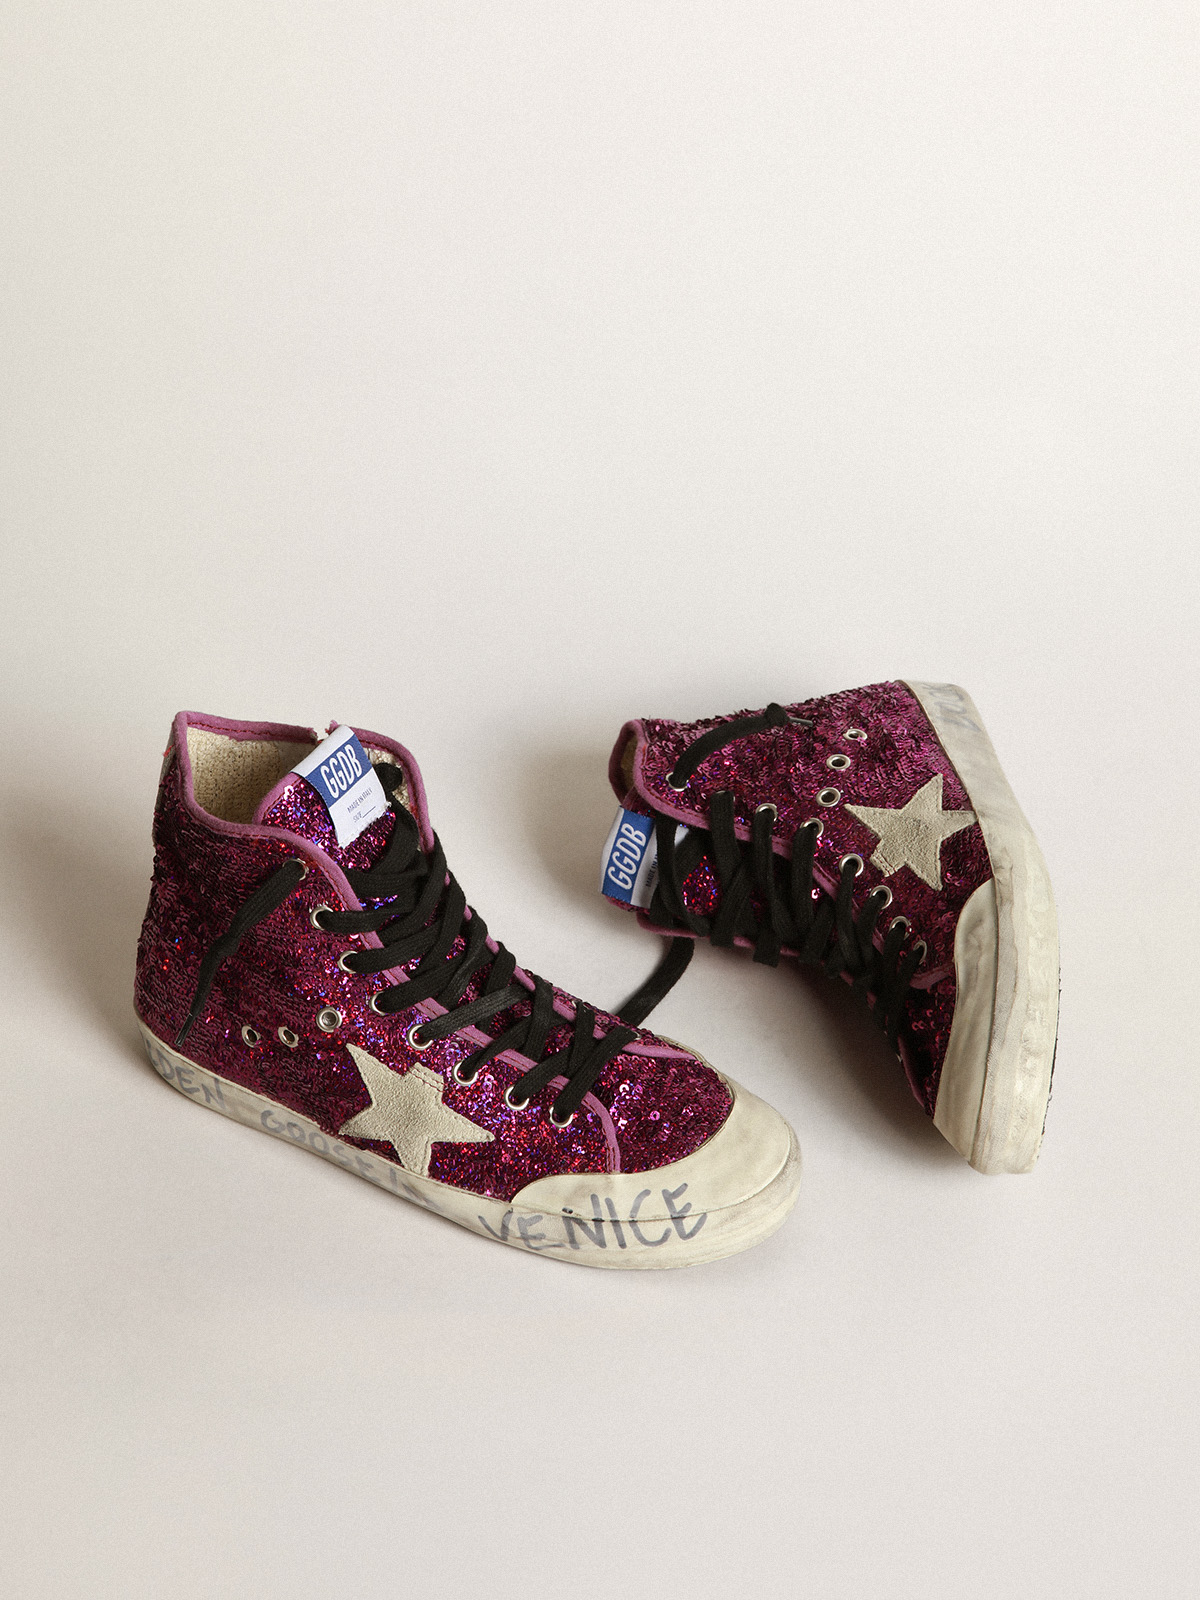 Francy sneakers with sequins and handwritten lettering on the outsole |  Golden Goose